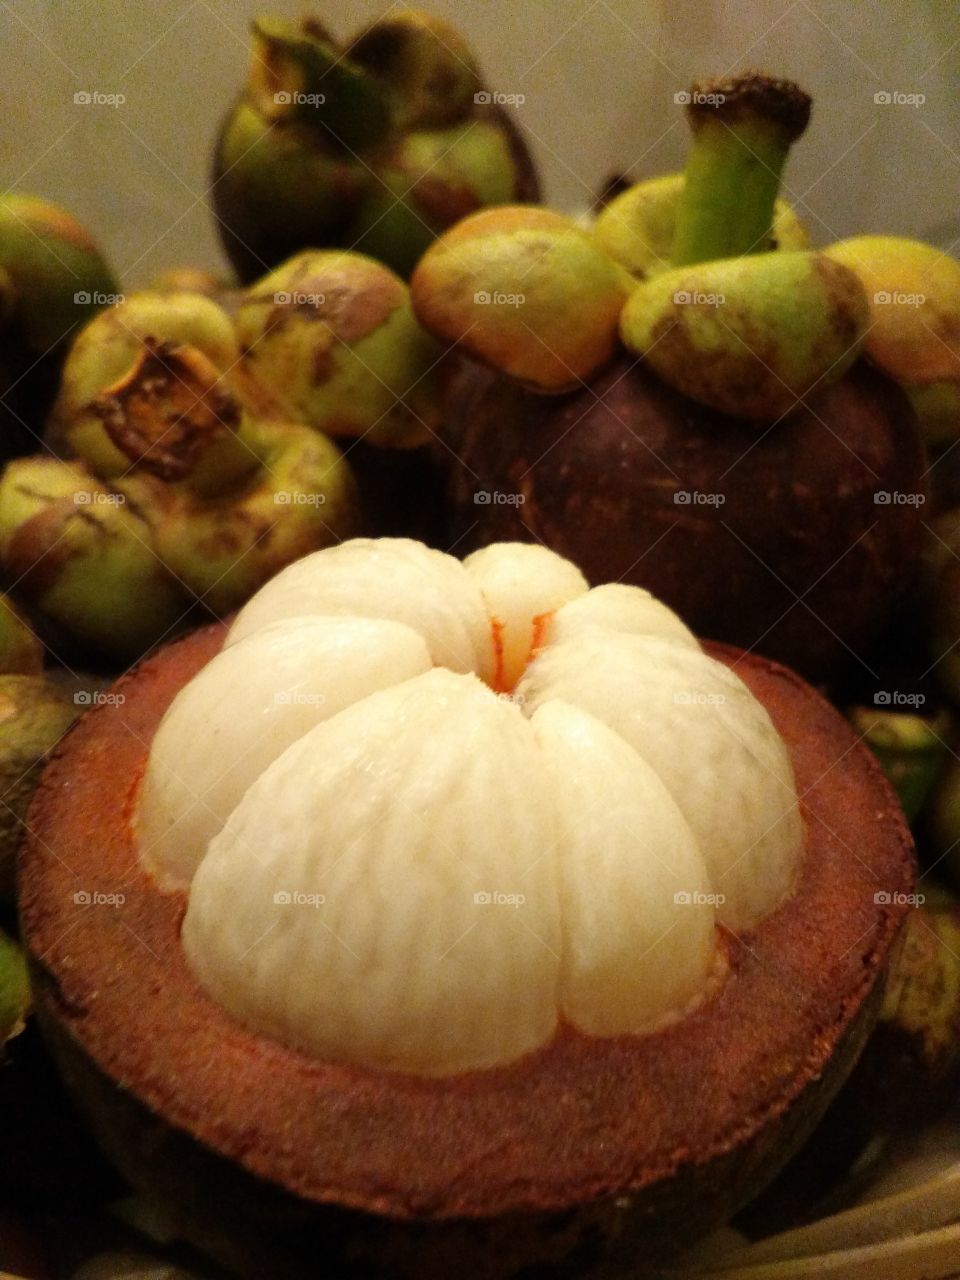 mangosteen from malaysia